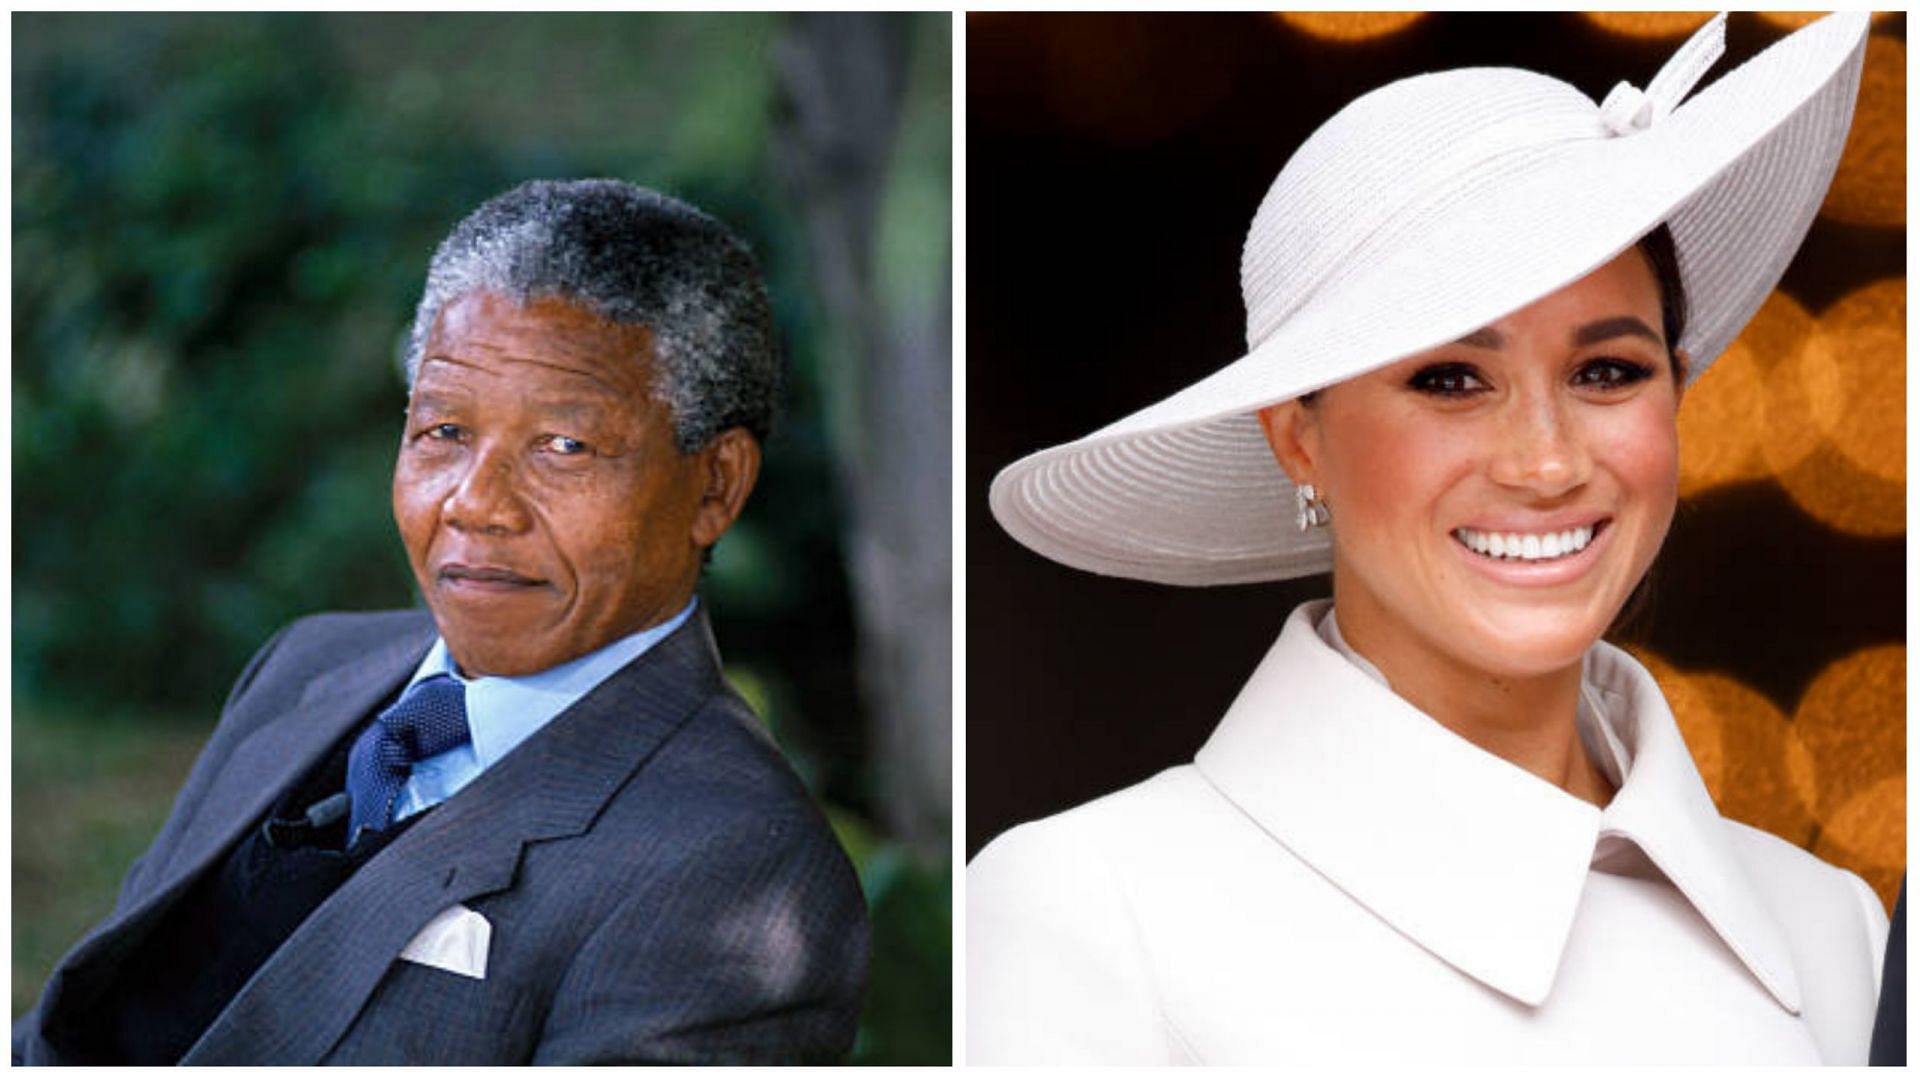 Meghan Markle is being criticized for comparing her wedding to Nelson Mandela